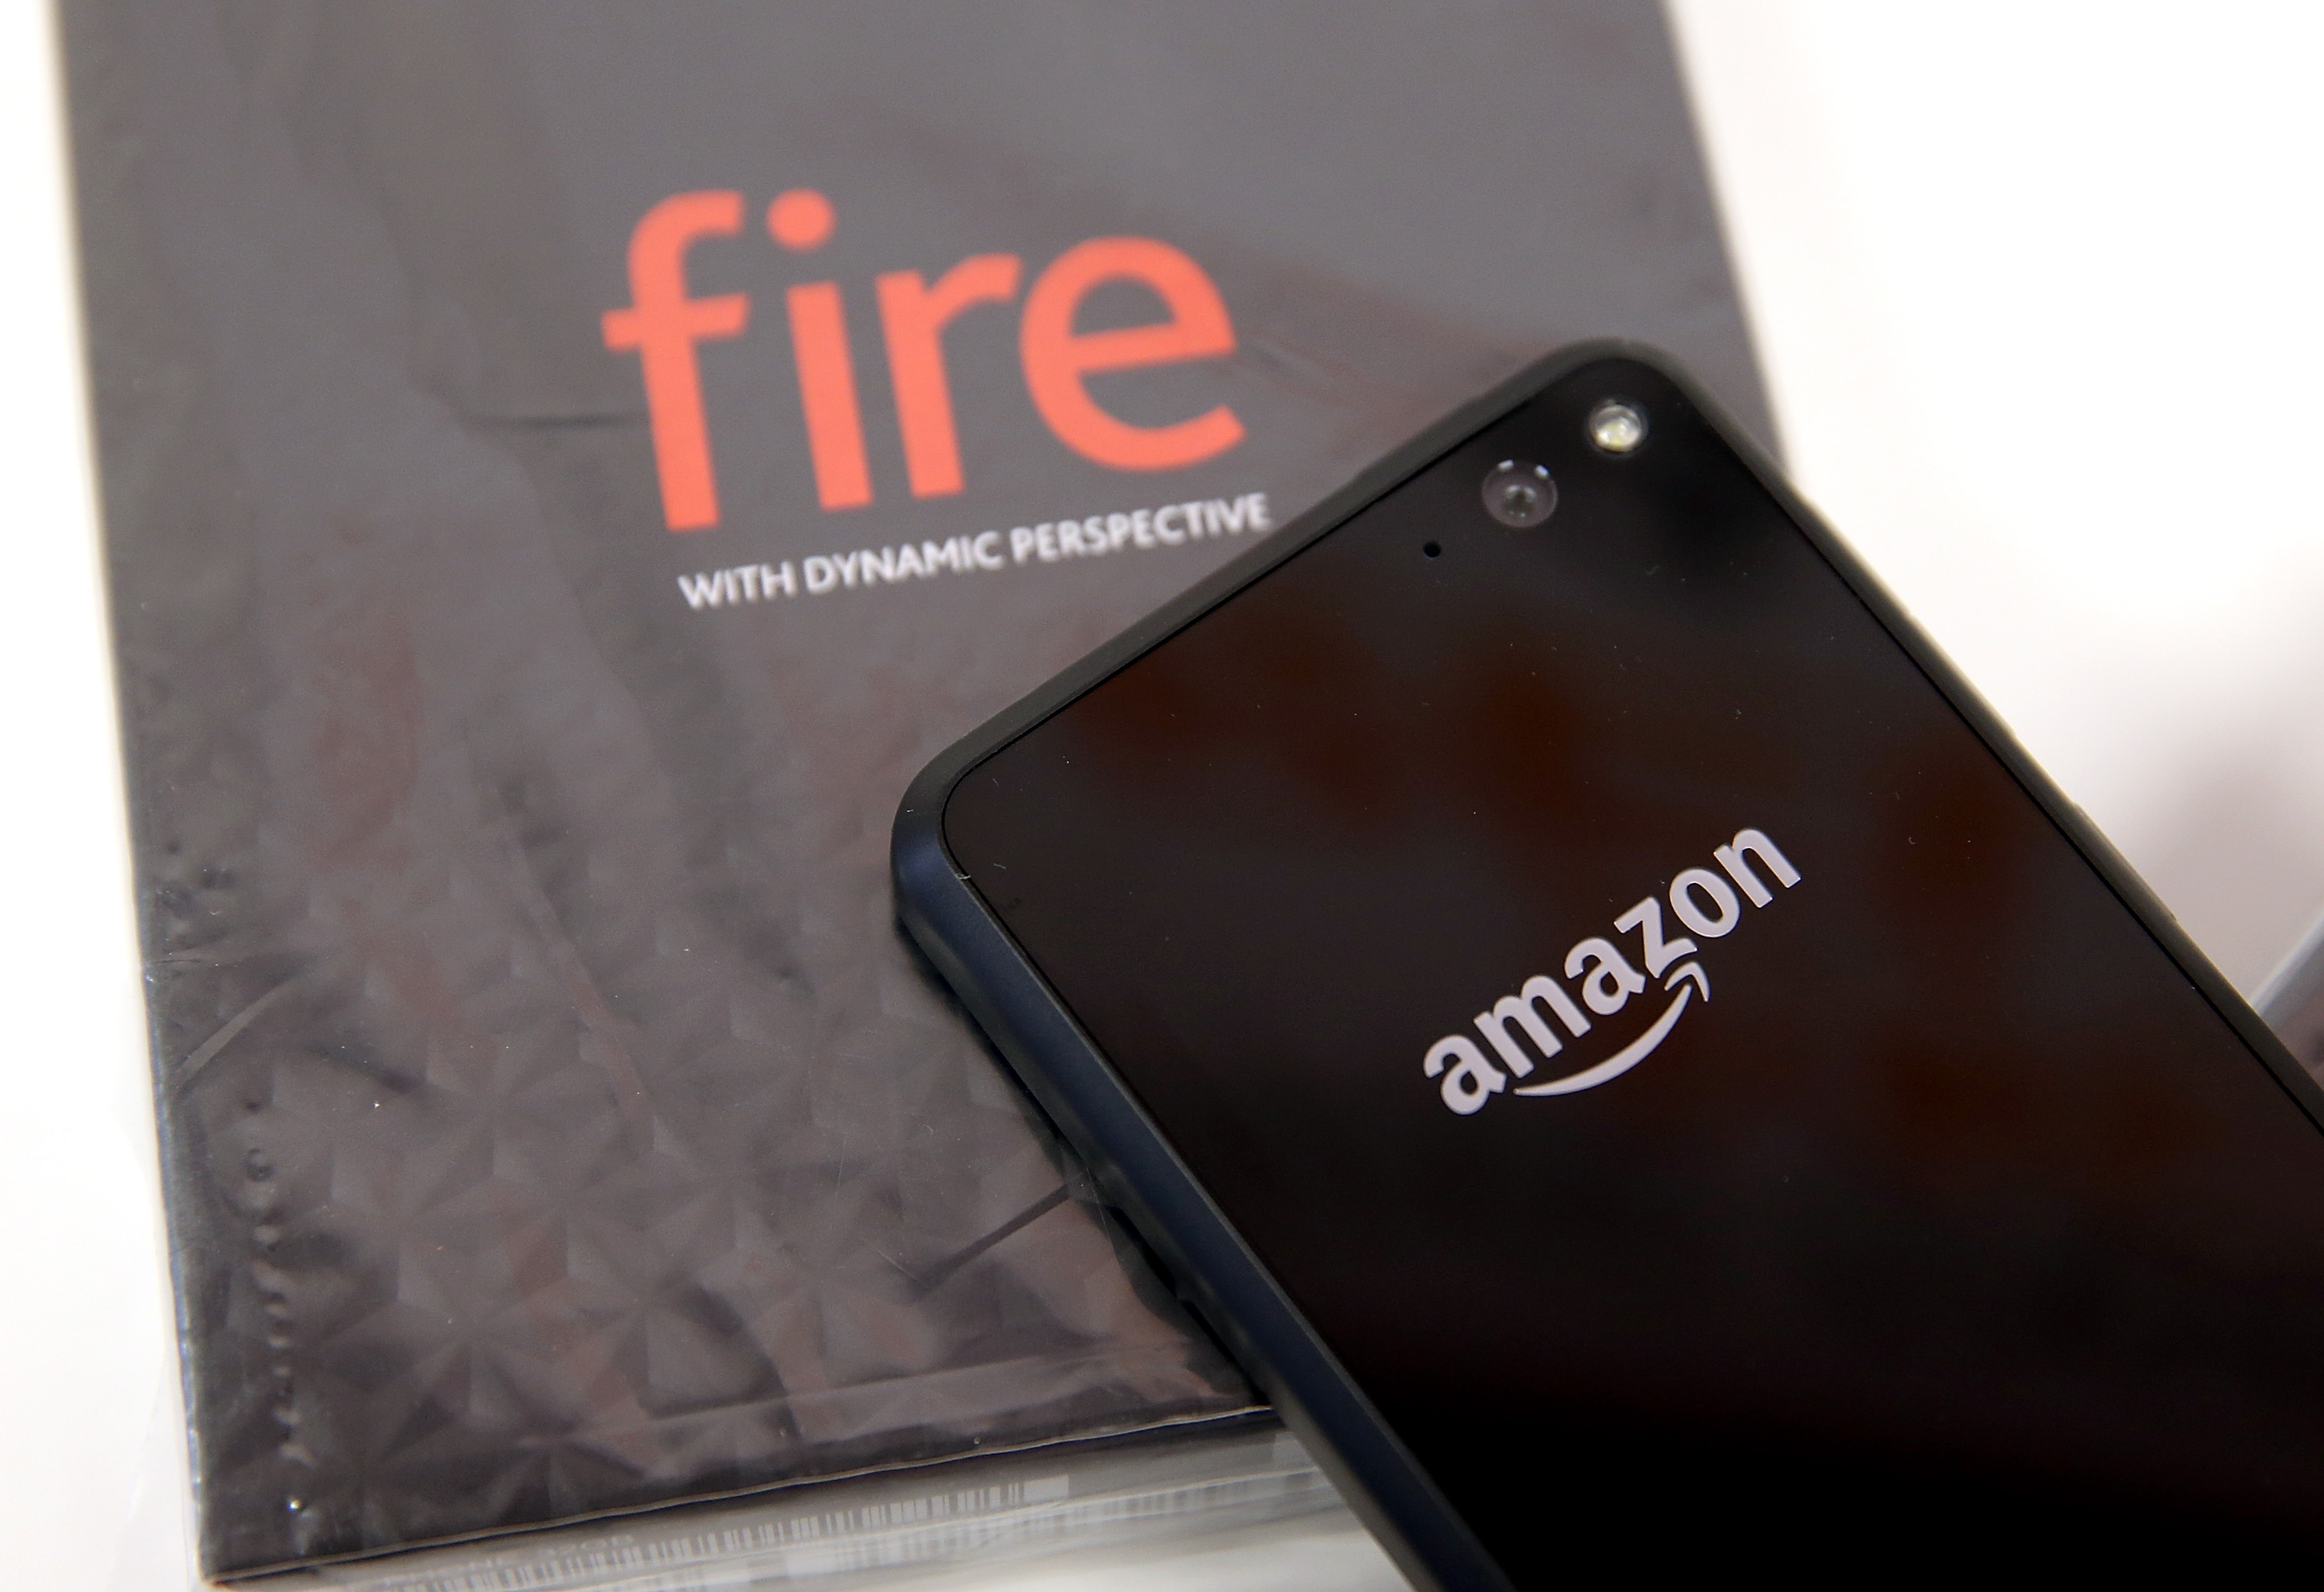 The Amazon Fire phone is displayed at an AT&amp;T store on July 25, 2014 in San Francisco, California.